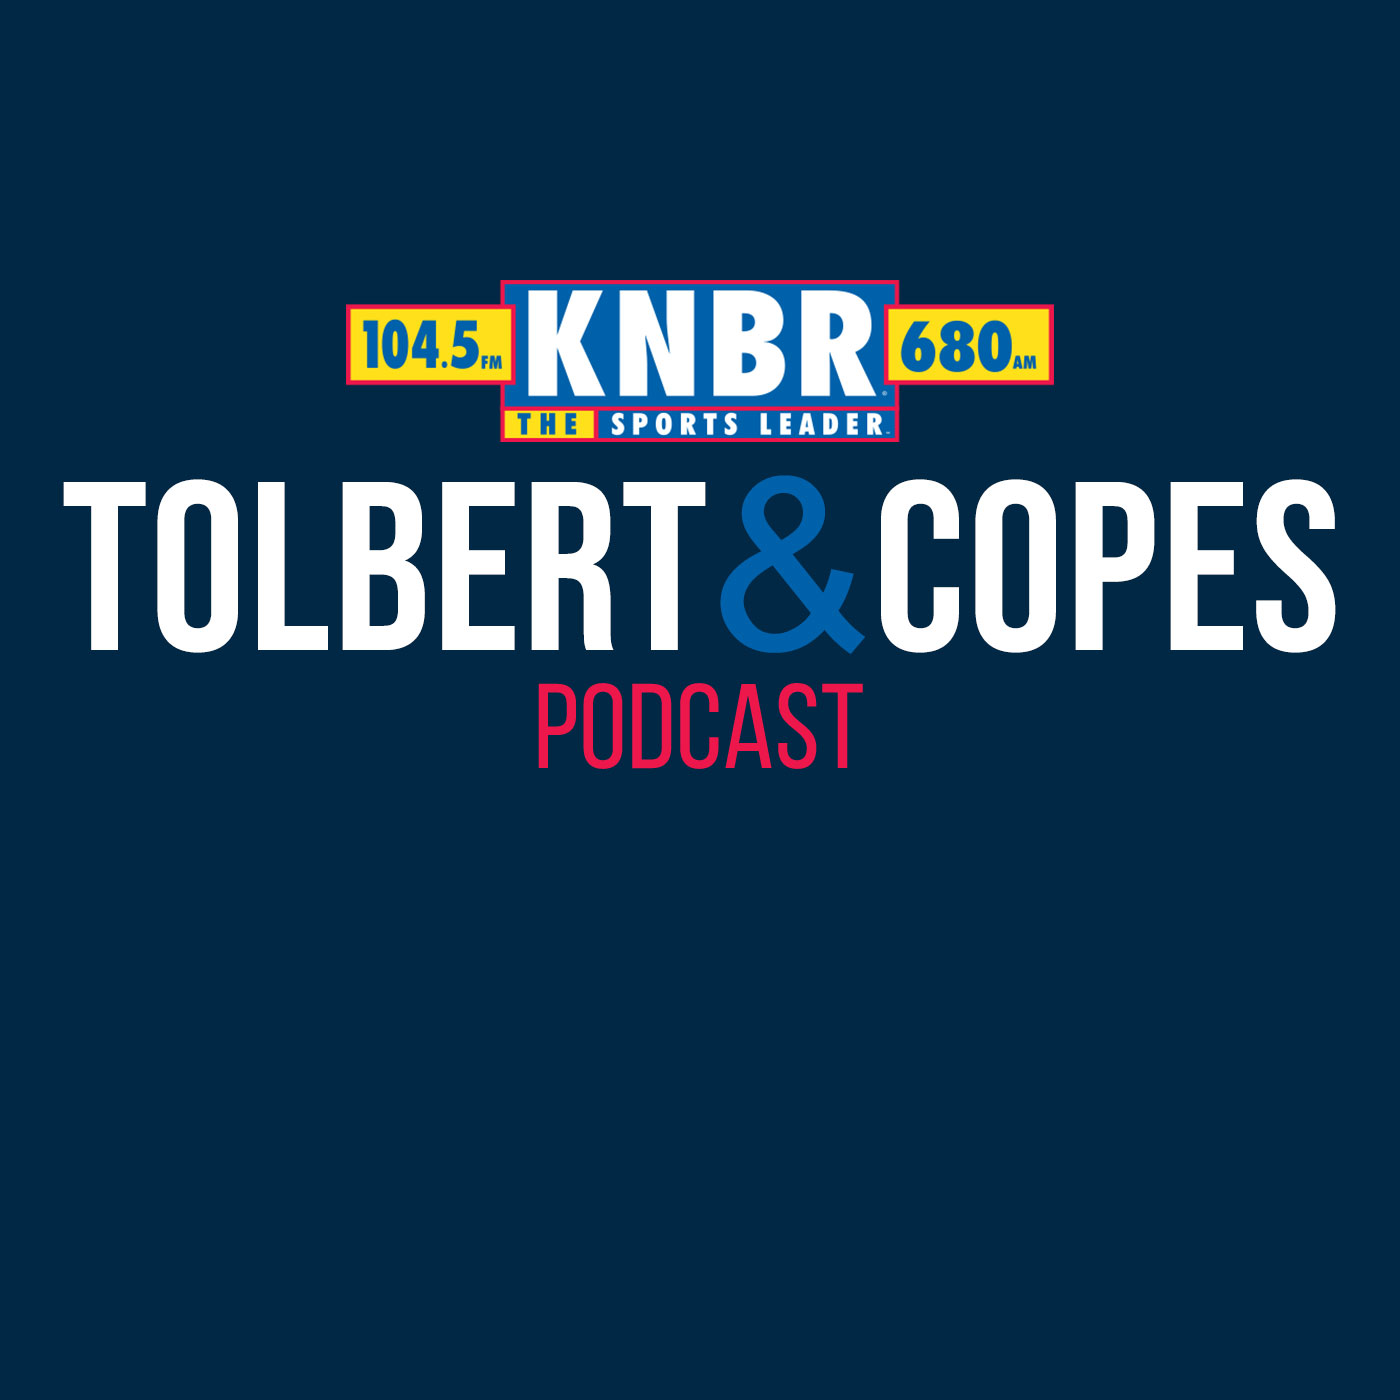 6-24 Sam Amick joins Tolbert & Copes to discuss if Klay Thompson & the Warriors are headed for divorce